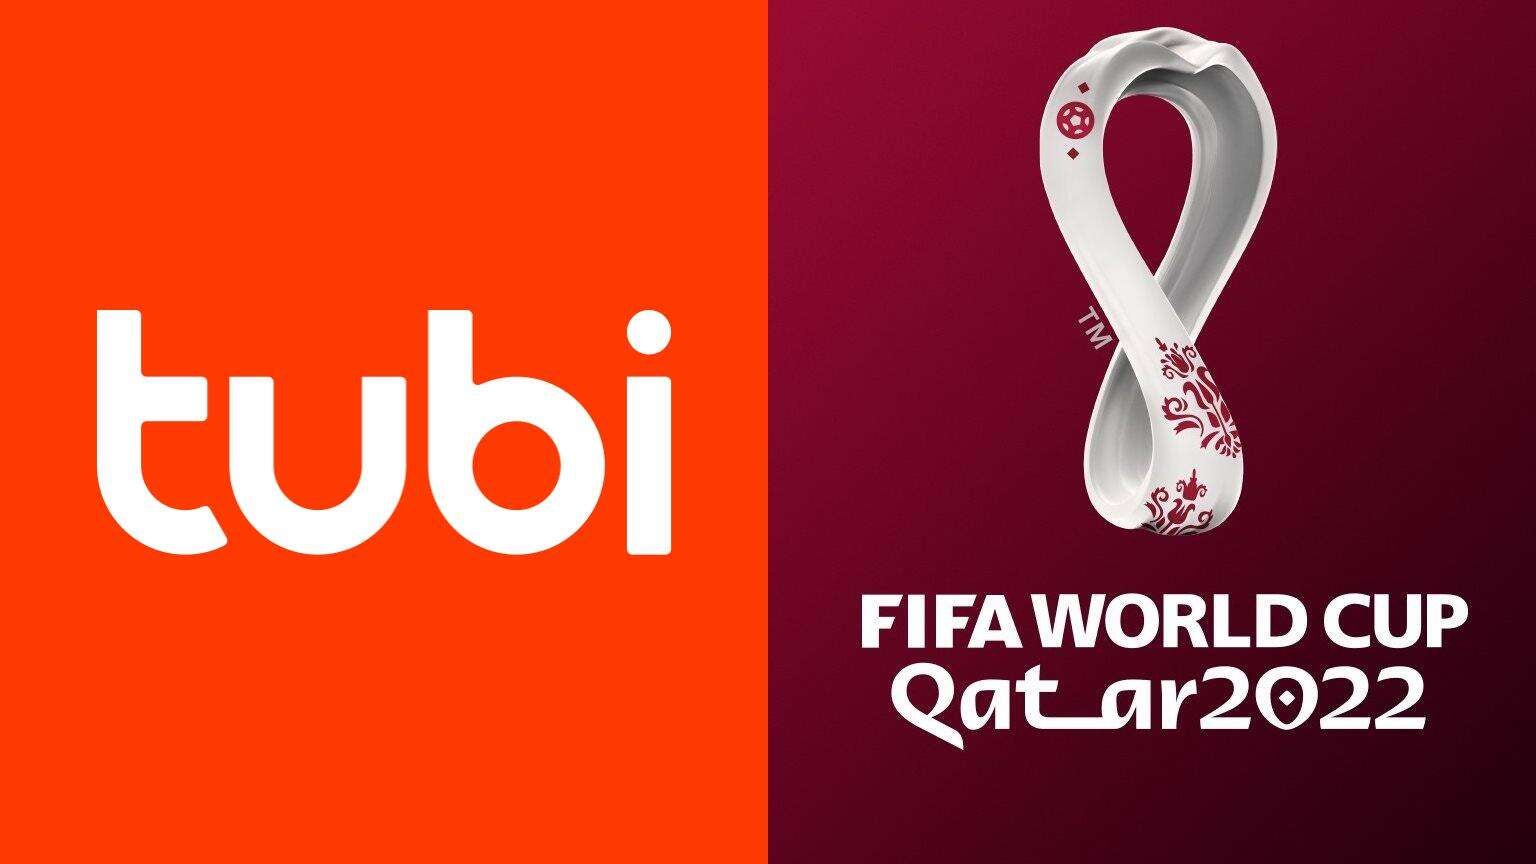 Tubi Launching World Cup FAST Channel, Will Feature Every 2022 FIFA